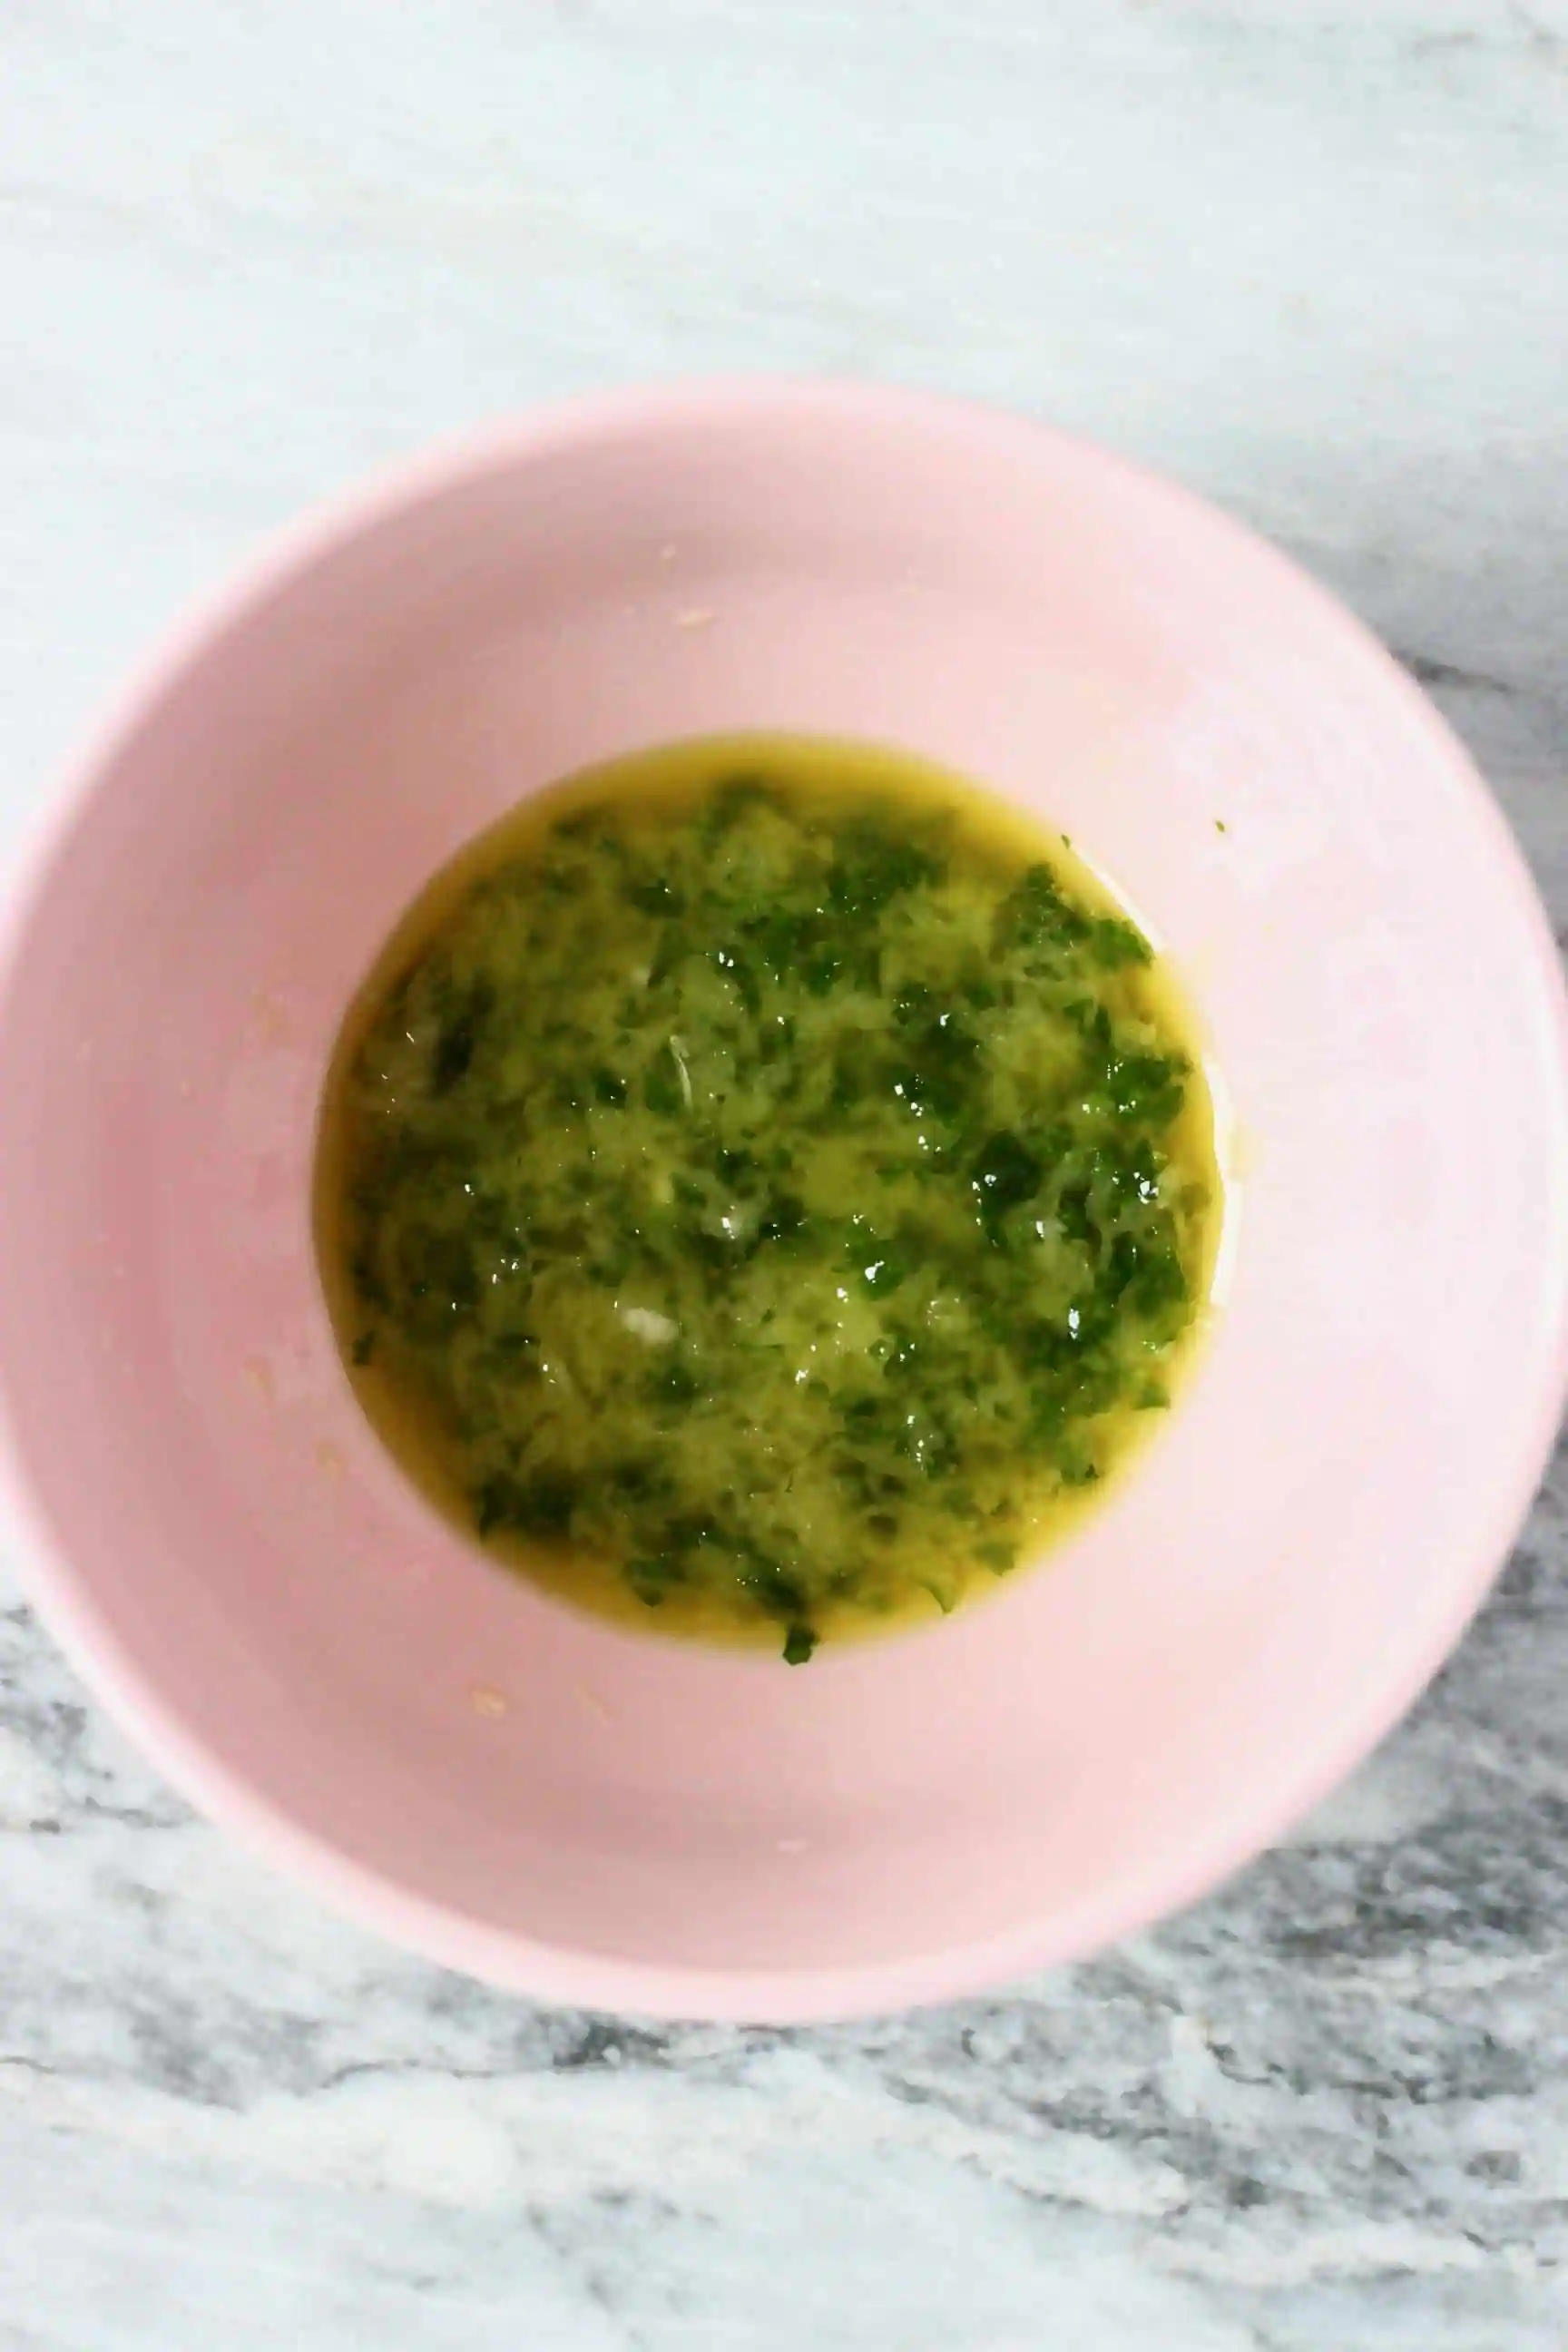 Oil, grated garlic and chopped green herbs in a pink bowl 